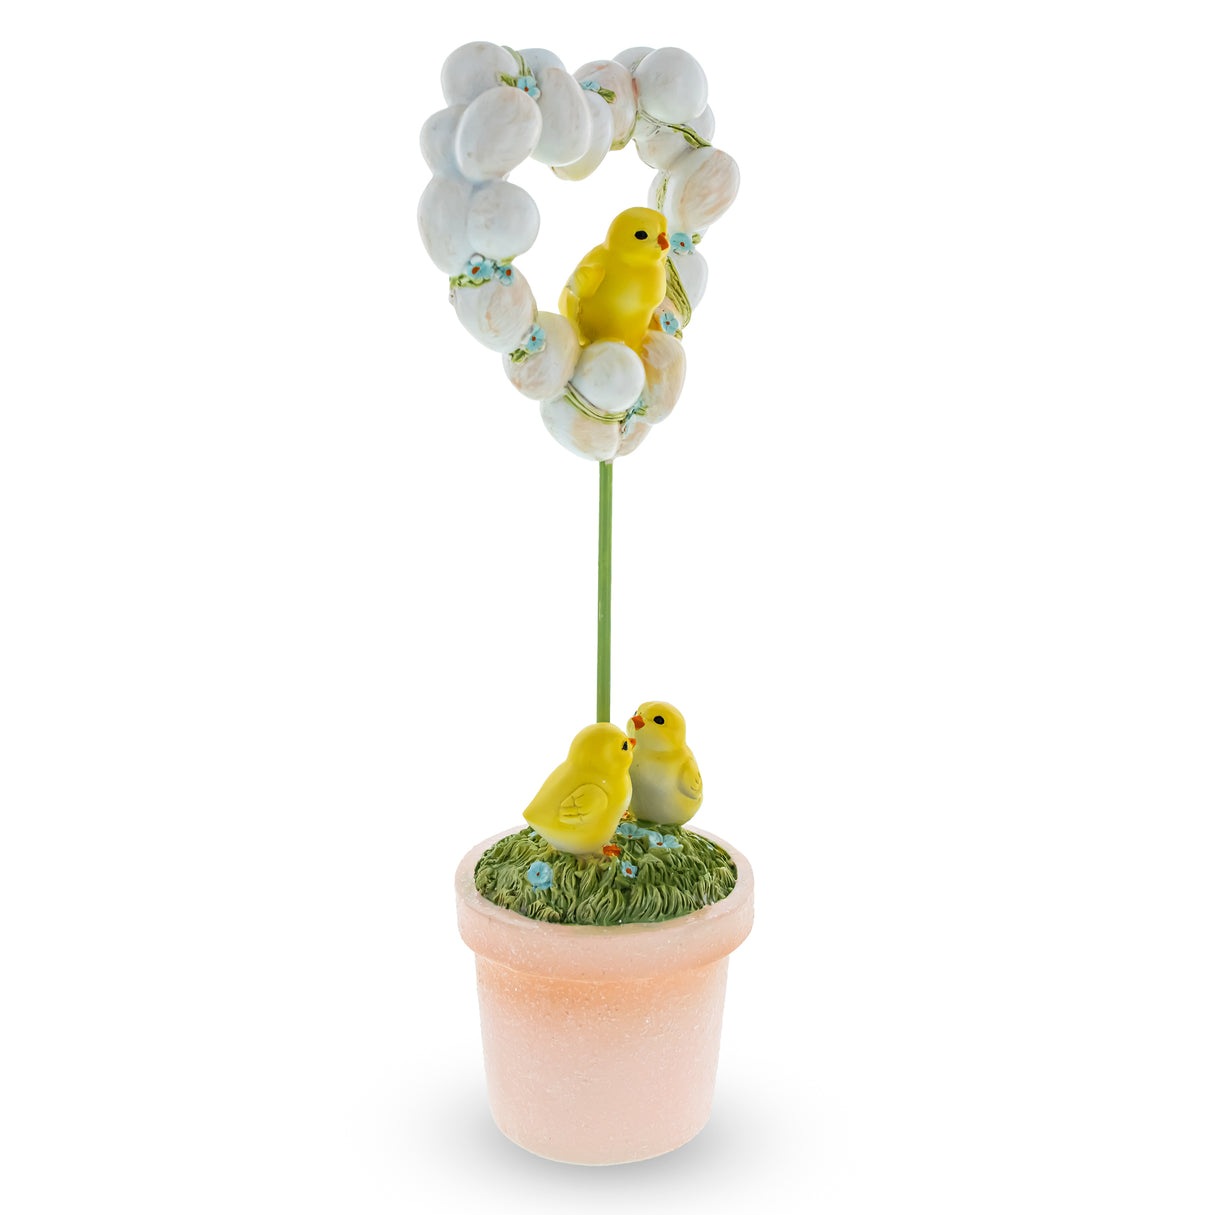 Adorable Chicks Nestled in Heart-Shaped Eggs Pot Easter Decorative Figurine ,dimensions in inches: 12.5 x 3.4 x 4.5